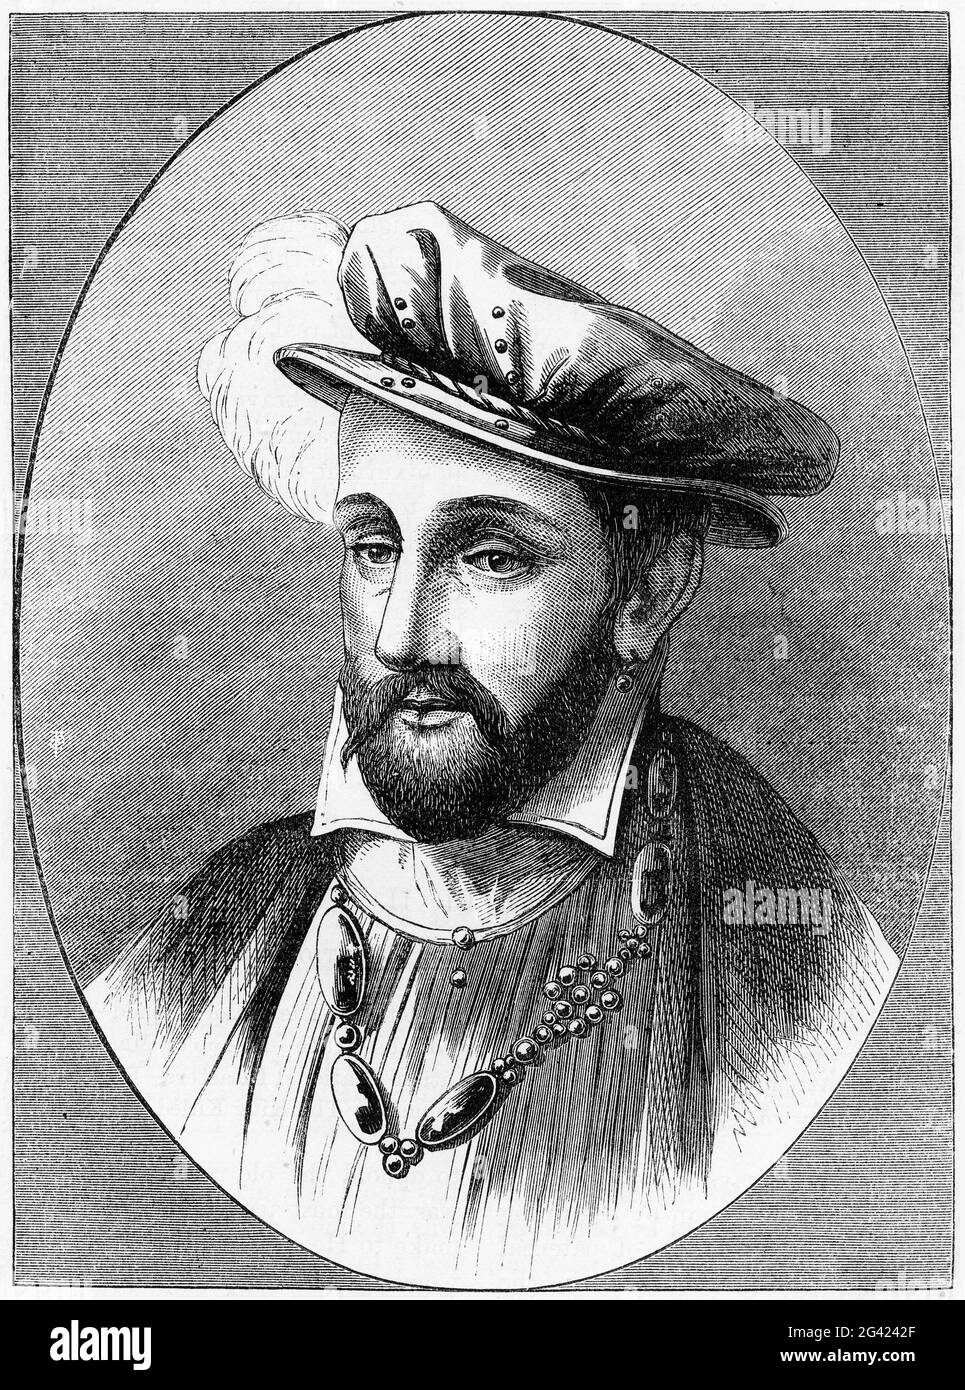 Engraving of Henry II (1519 – 1559) King of France from 31 March 1547 until his death in 1559. The second son of Francis I, he became Dauphin of France upon the death of his elder brother Francis III, Duke of Brittany, in 1536. Stock Photo